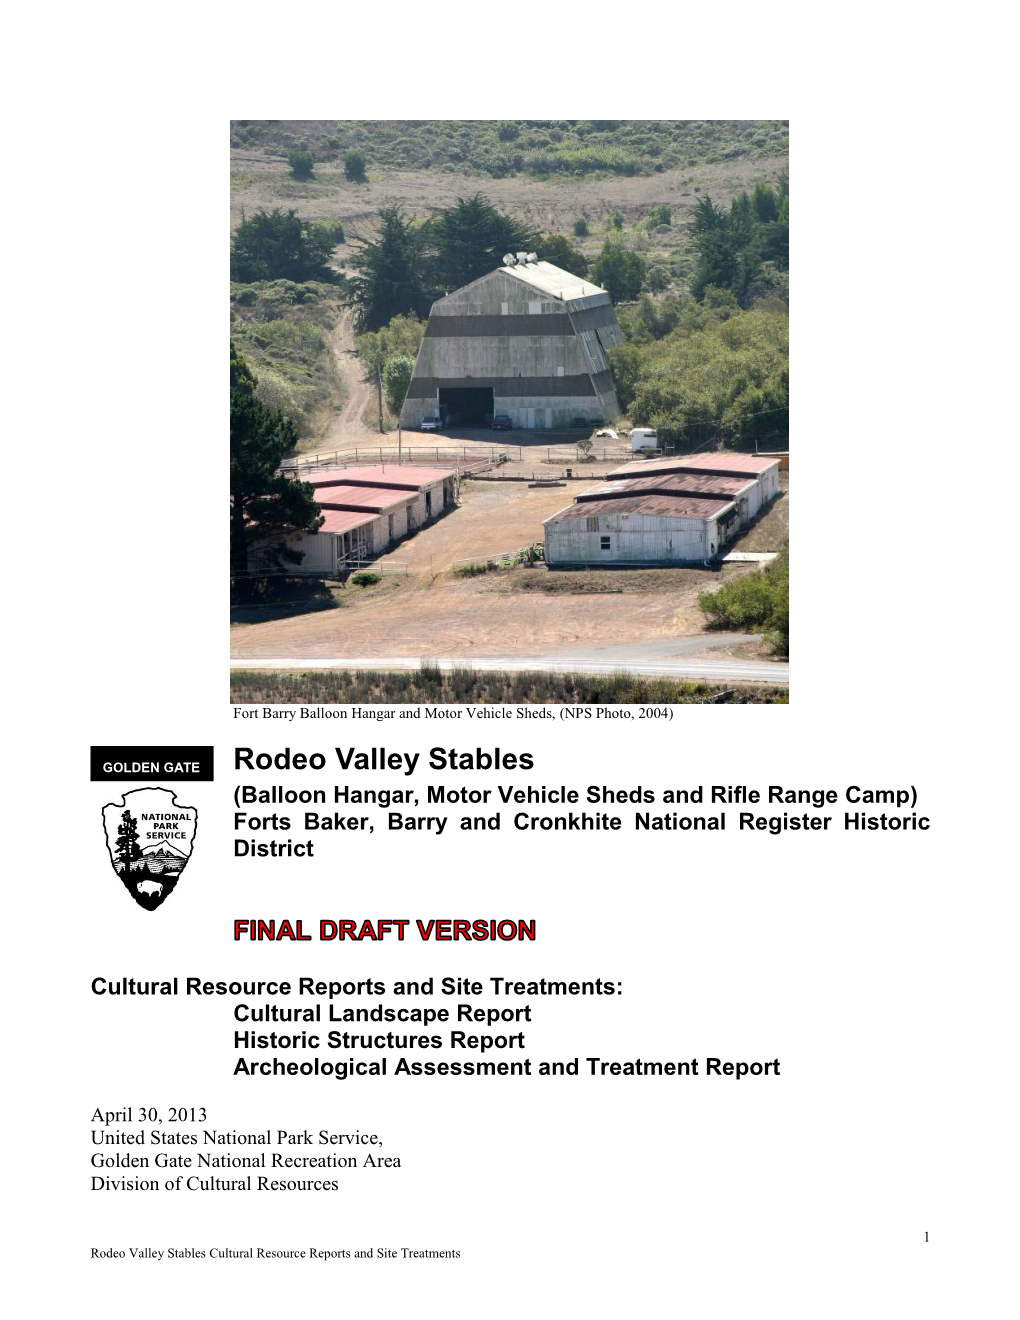 Rodeo Valley Stables (Balloon Hangar, Motor Vehicle Sheds and Rifle Range Camp) Forts Baker, Barry and Cronkhite National Register Historic District